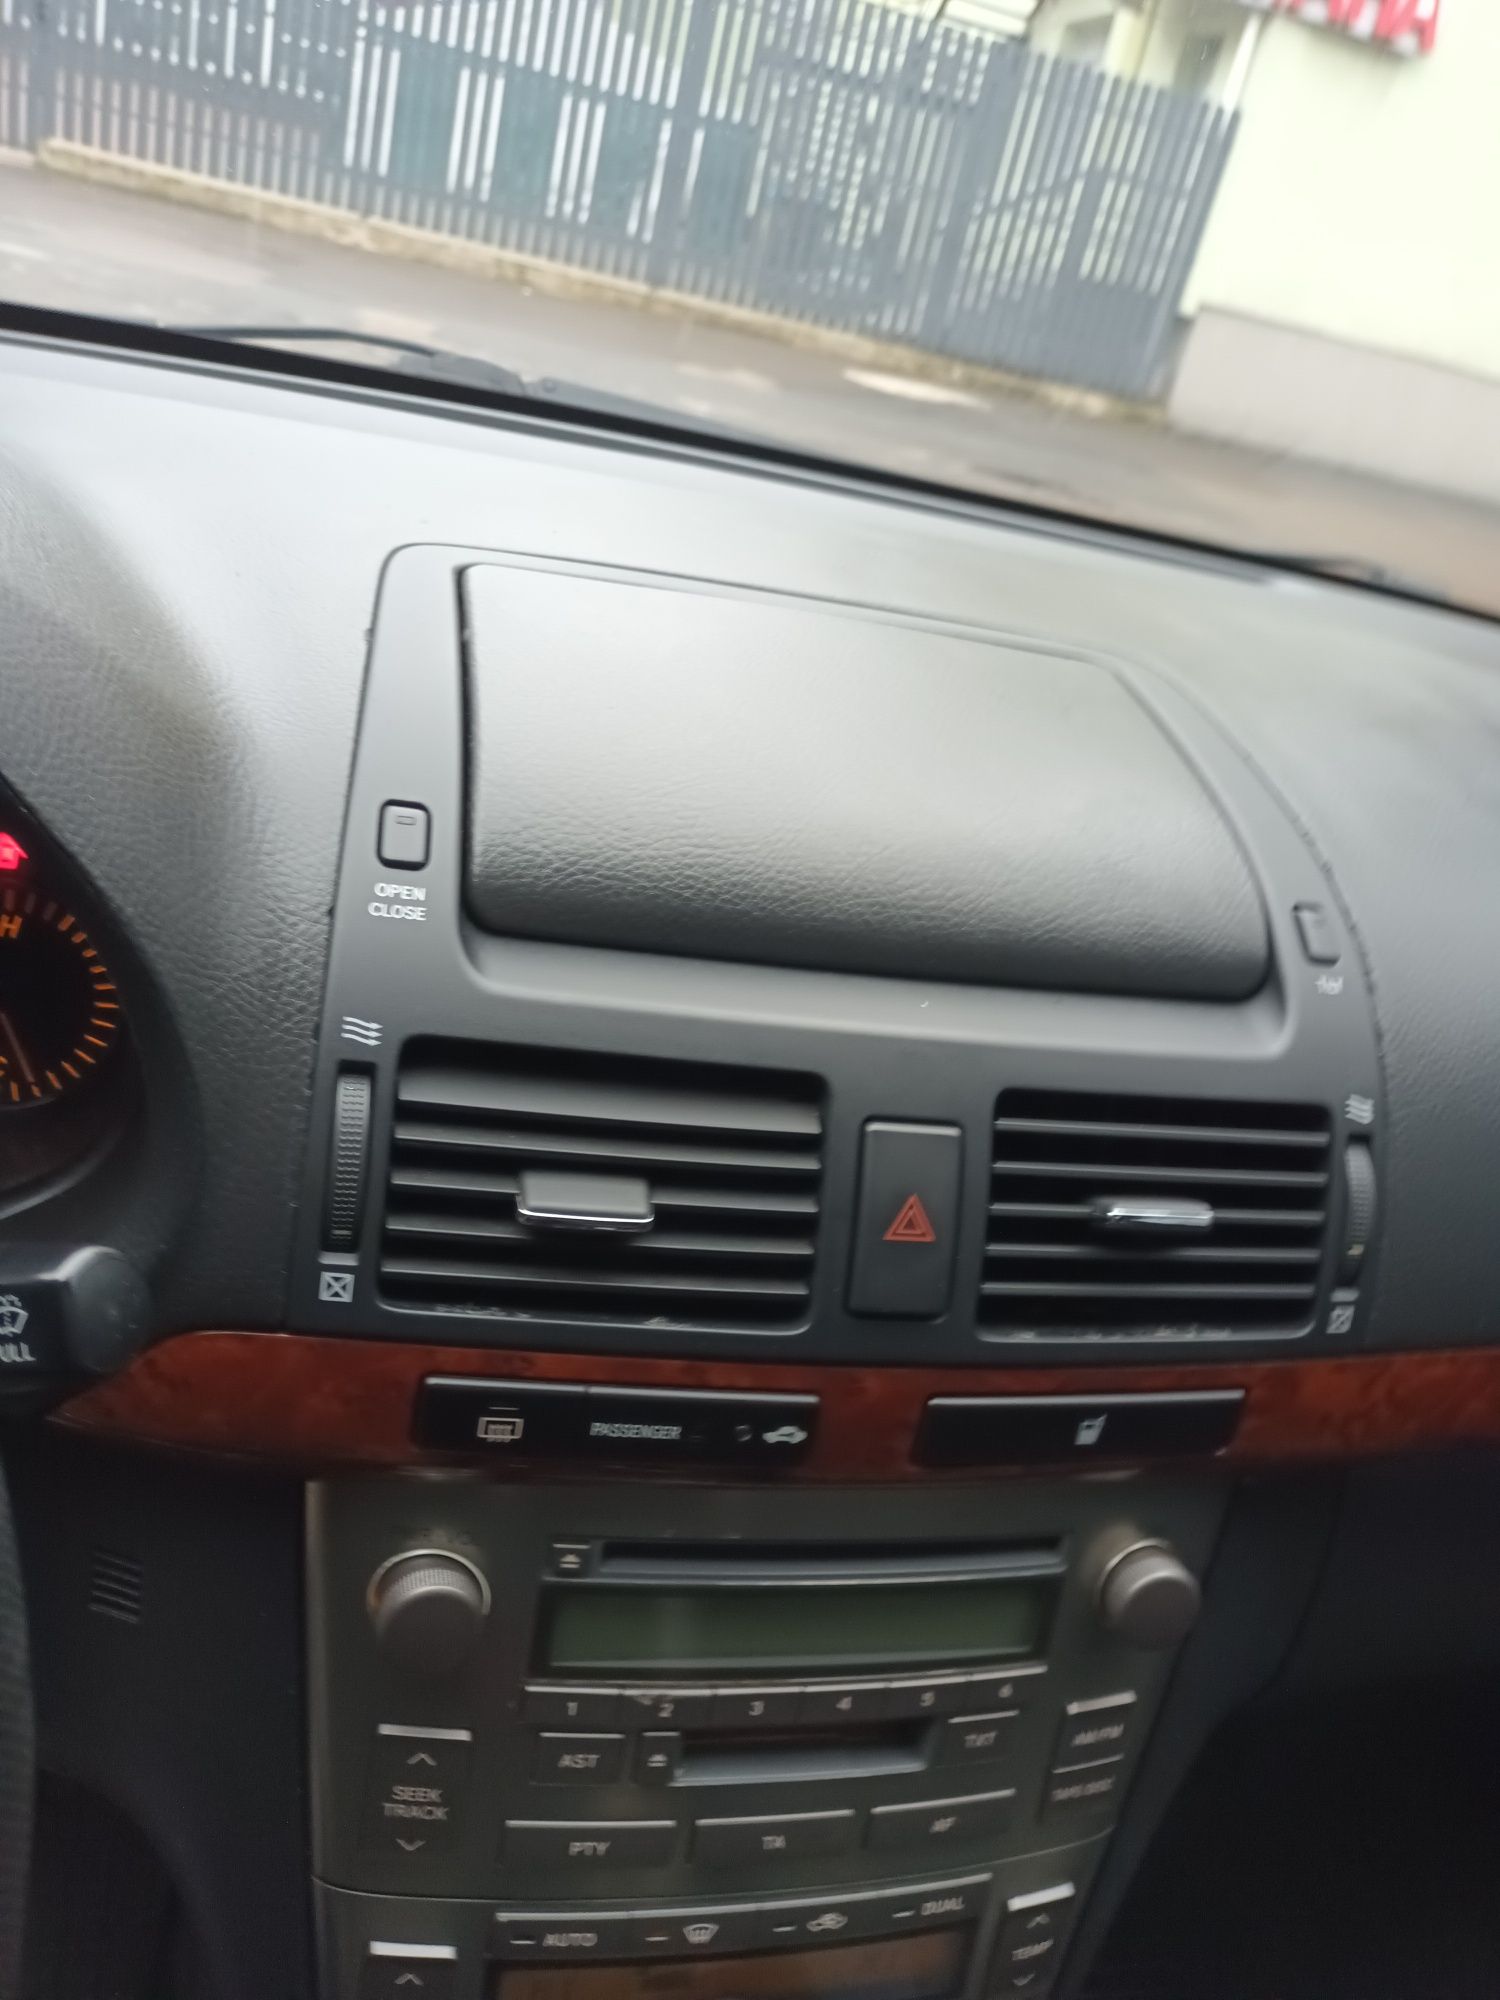 Toyota Avensis T25 2003